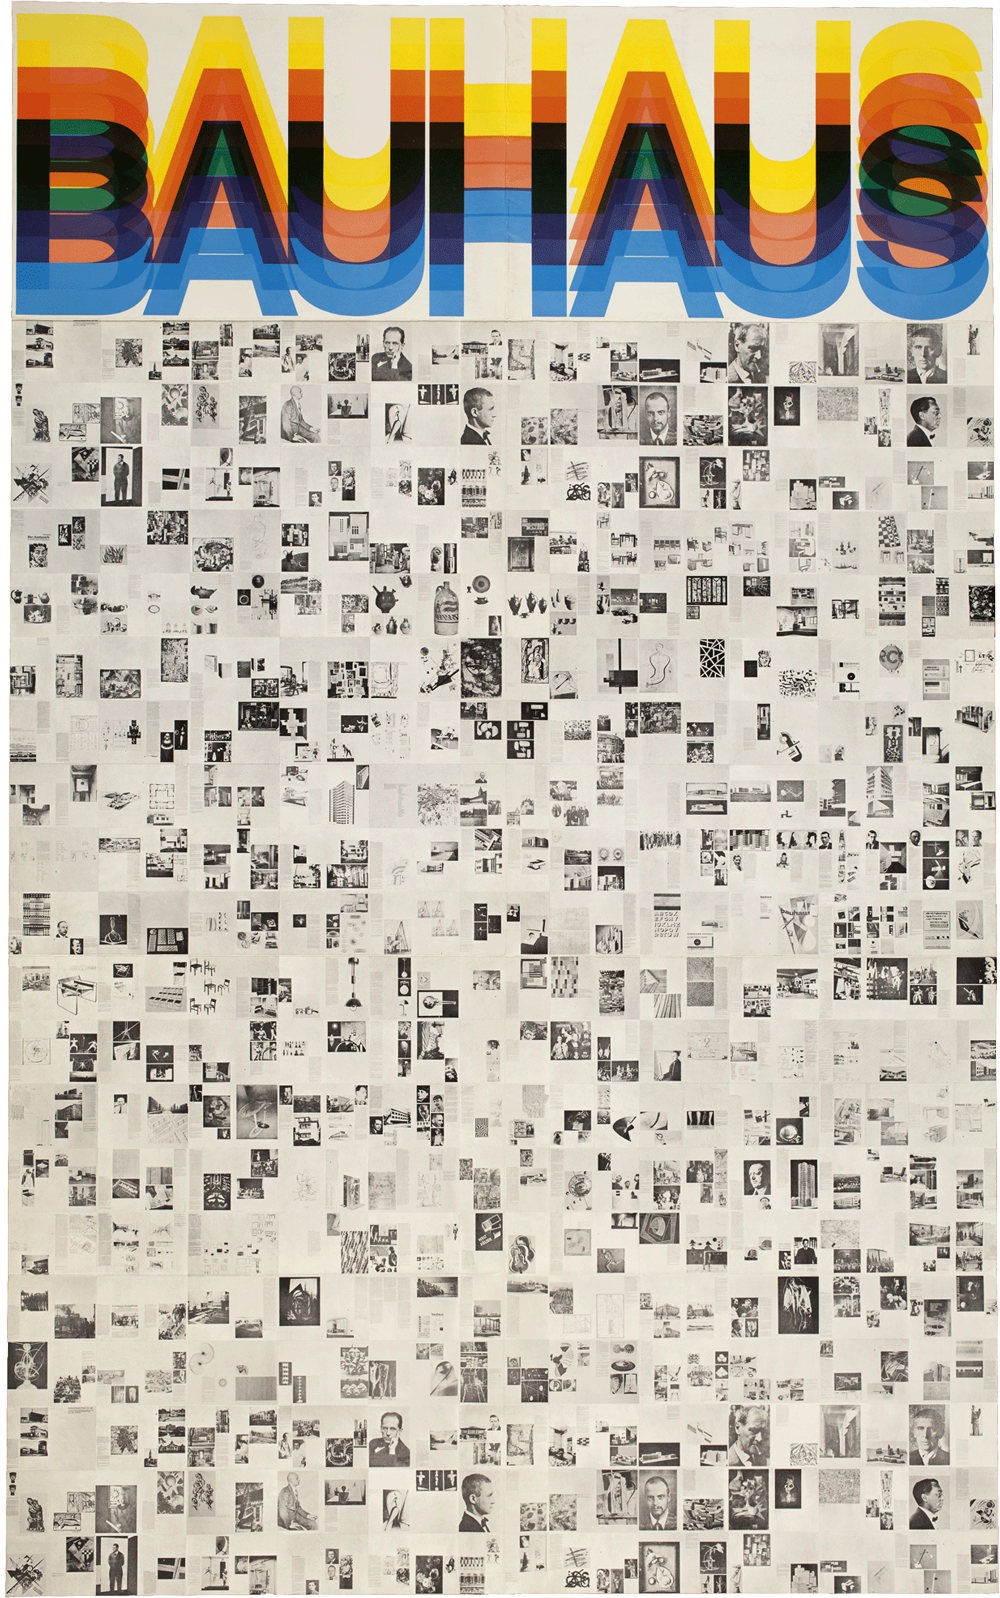 Promotional poster designed by Muriel Cooper for MIT’s Bauhaus book